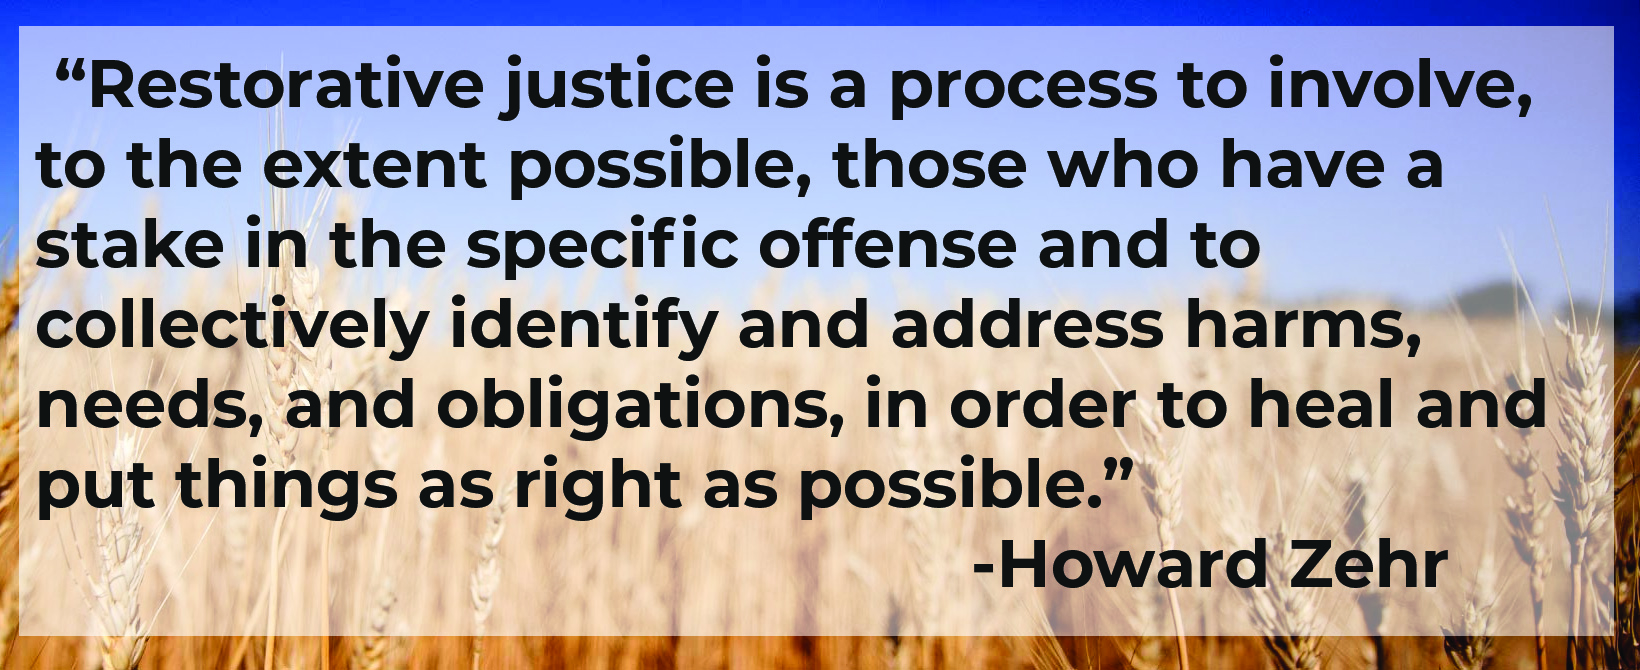  “Restorative justice is a process to involve, to the extent possible, those who have a stake in the specific offense and to collectively identify and address harms, needs, and obligations, in order to heal and put things as right as possible.”  - Howard Zehr